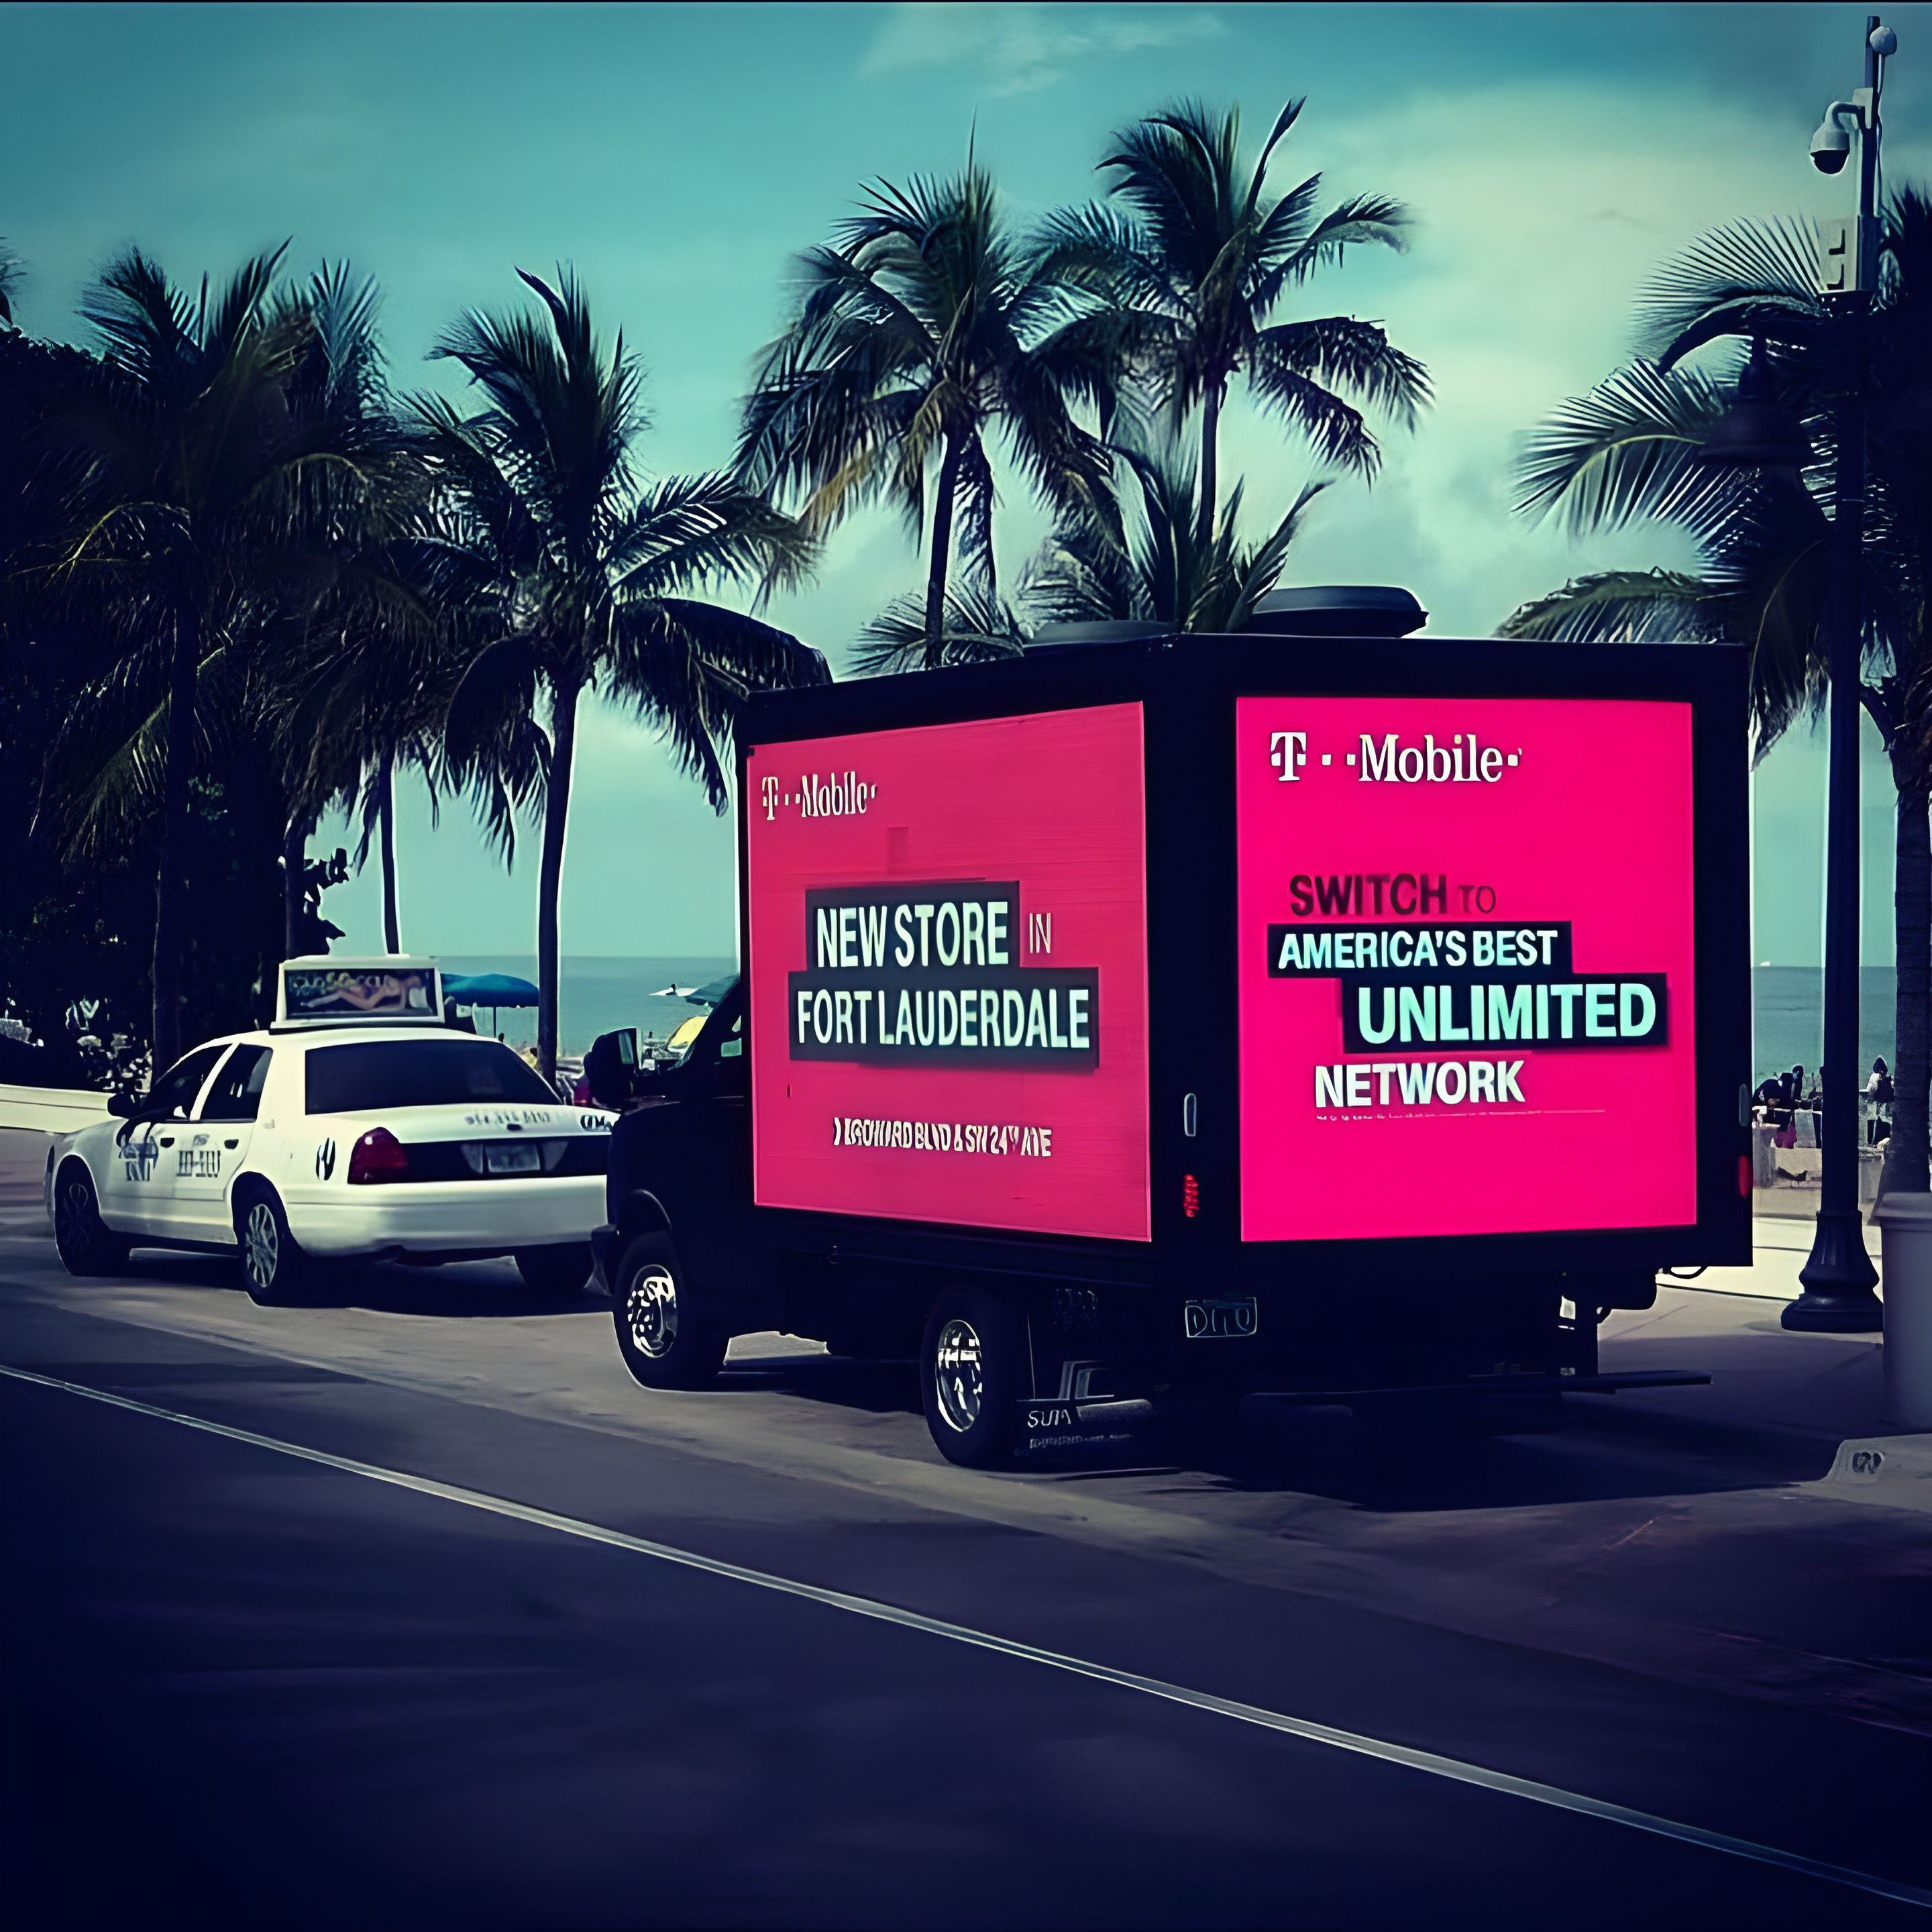 Image of a mobile billboard truck advertising a brand message